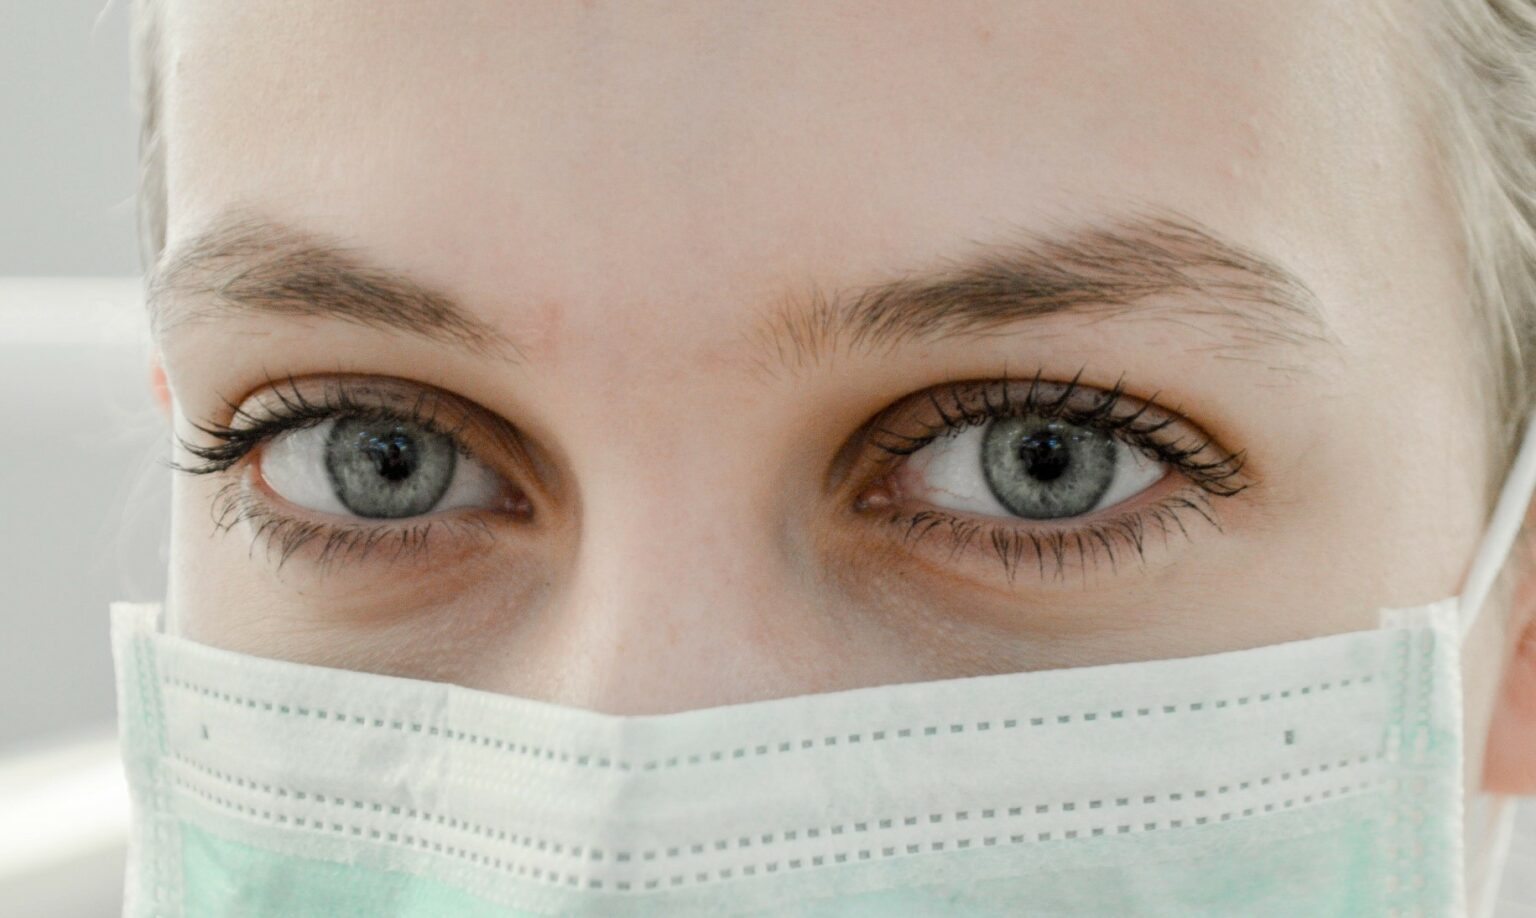 A woman wears a surgical mask and cap. Only herblue eyes are visible.